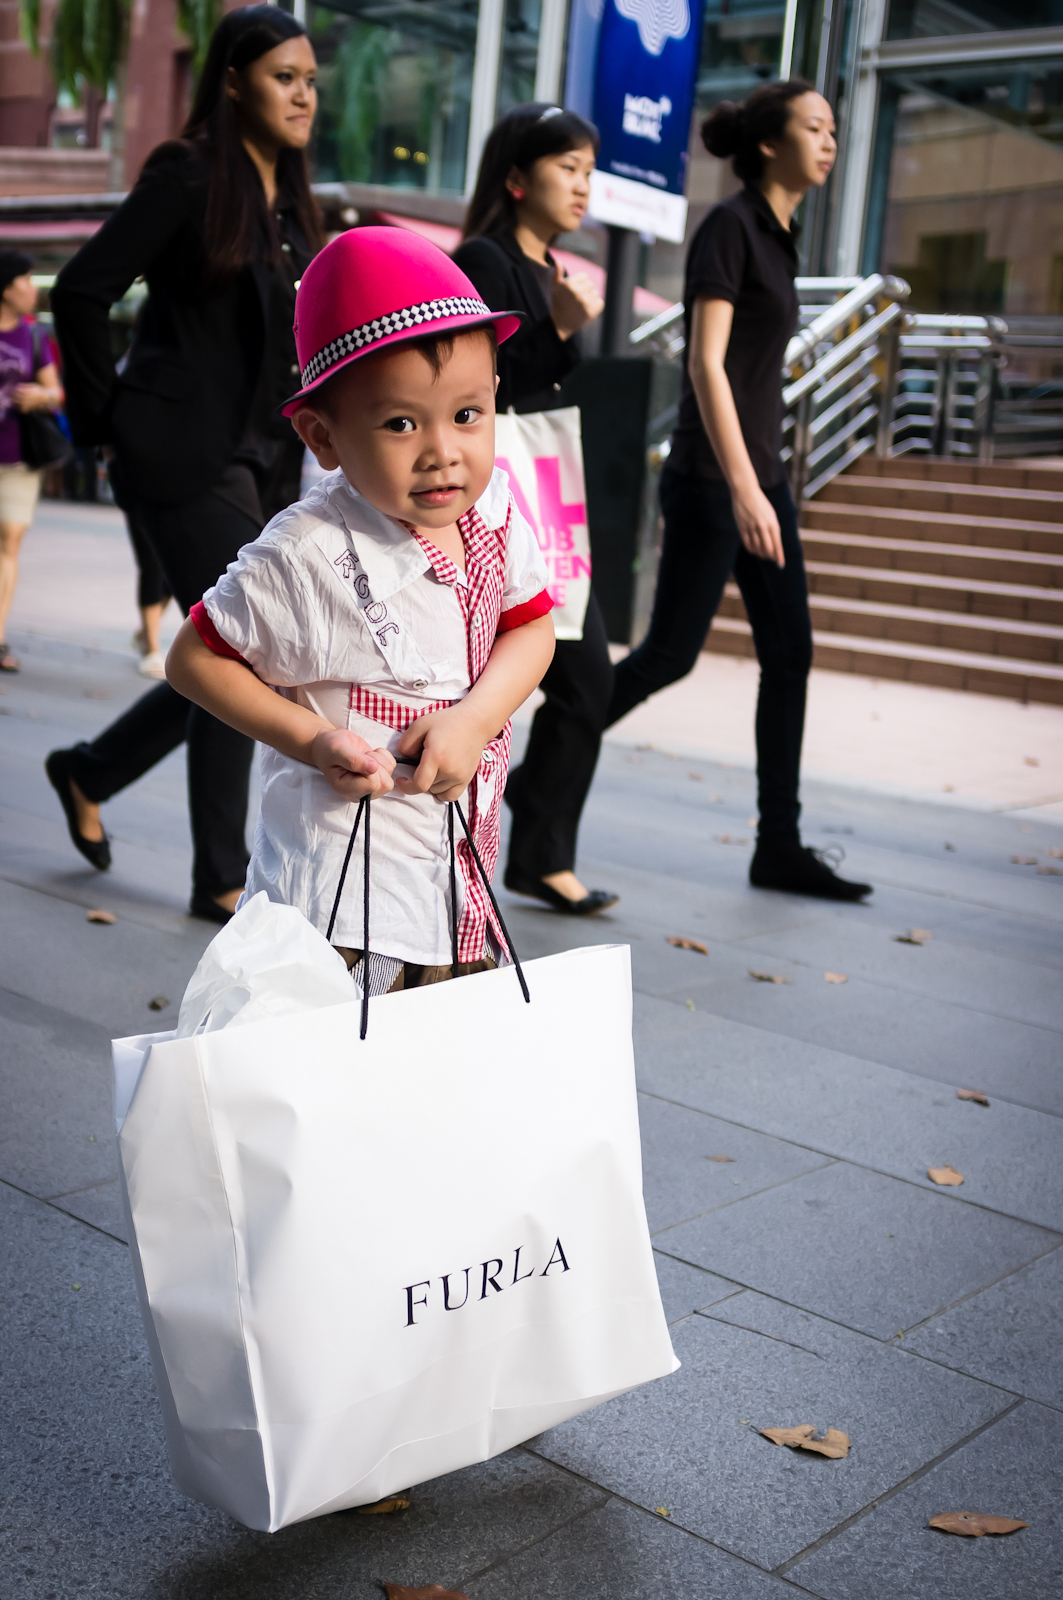 Street photography - Little boy with a pink hat helping to carry shopping bags